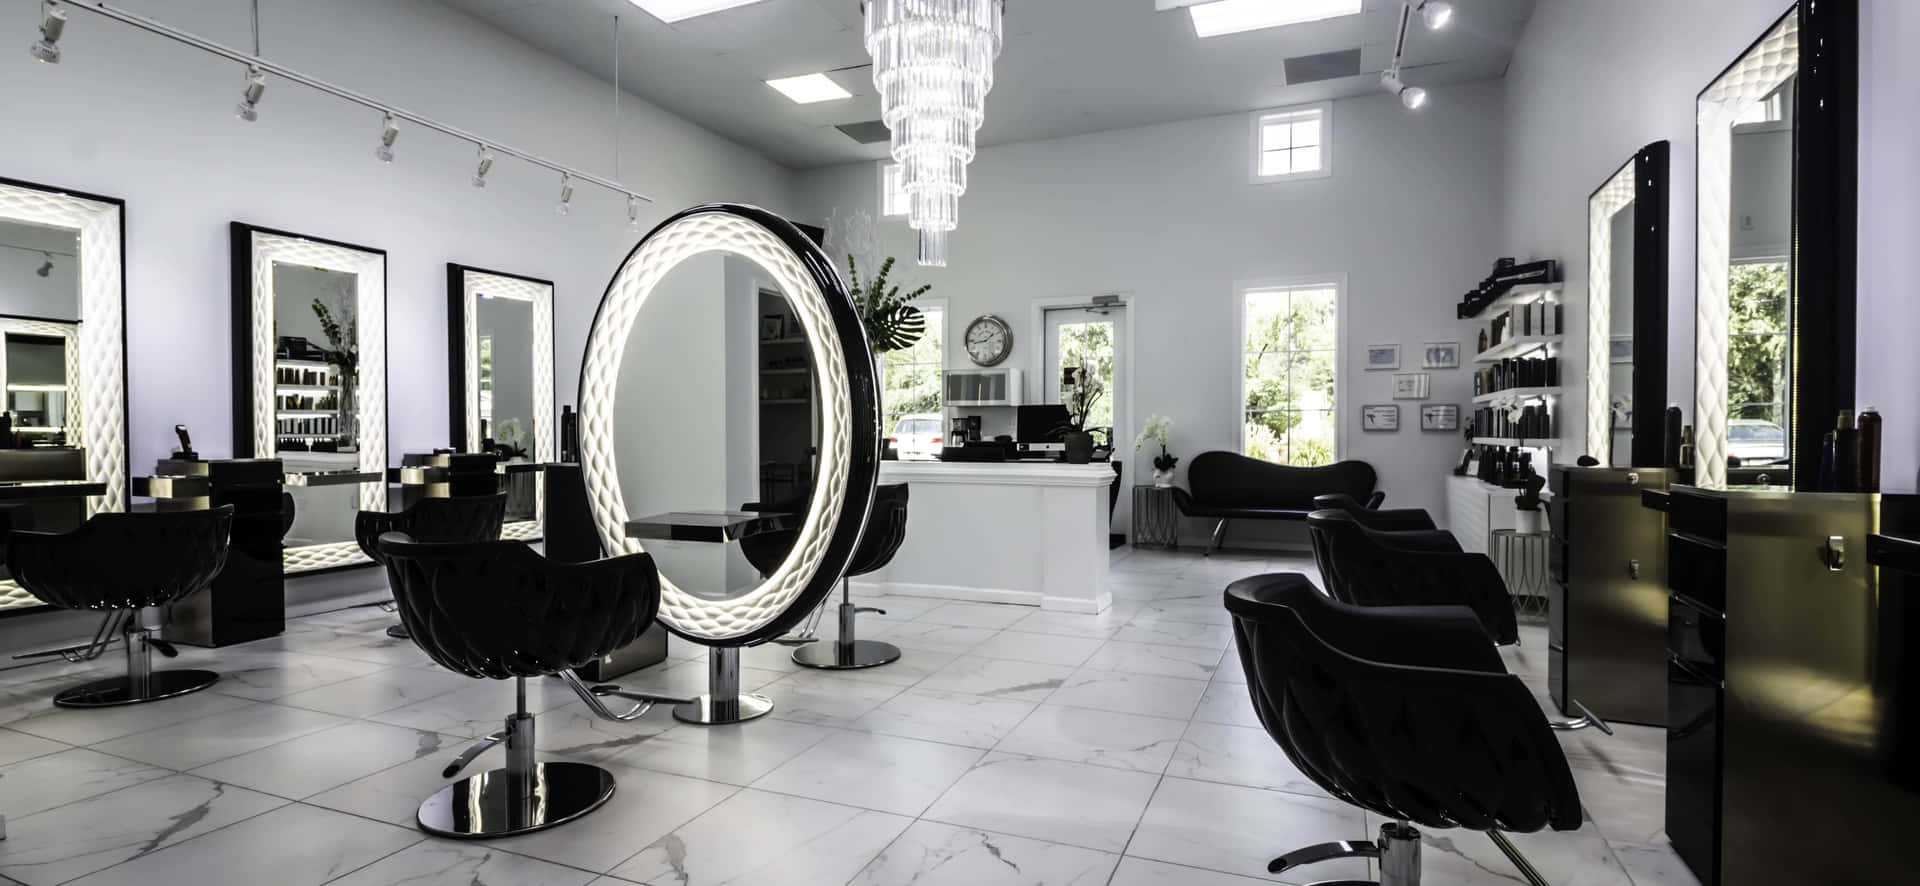 Come visit us at our Hair Salon and experience total transformation